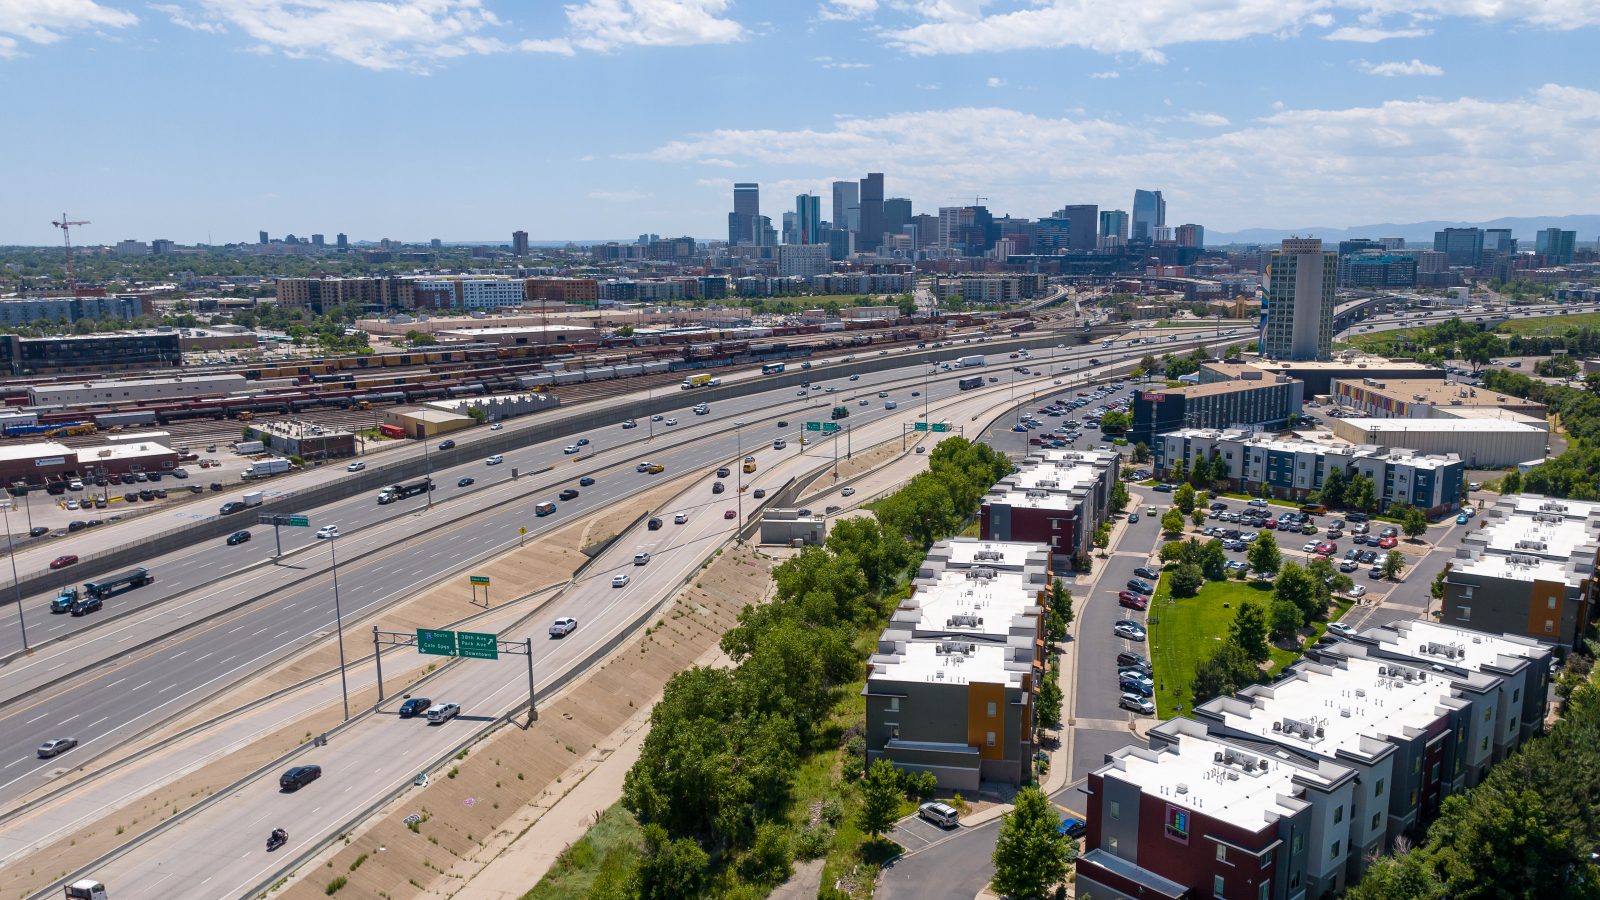 Aerial photo of Denver with a view of Downtown as well as Interstate 70.